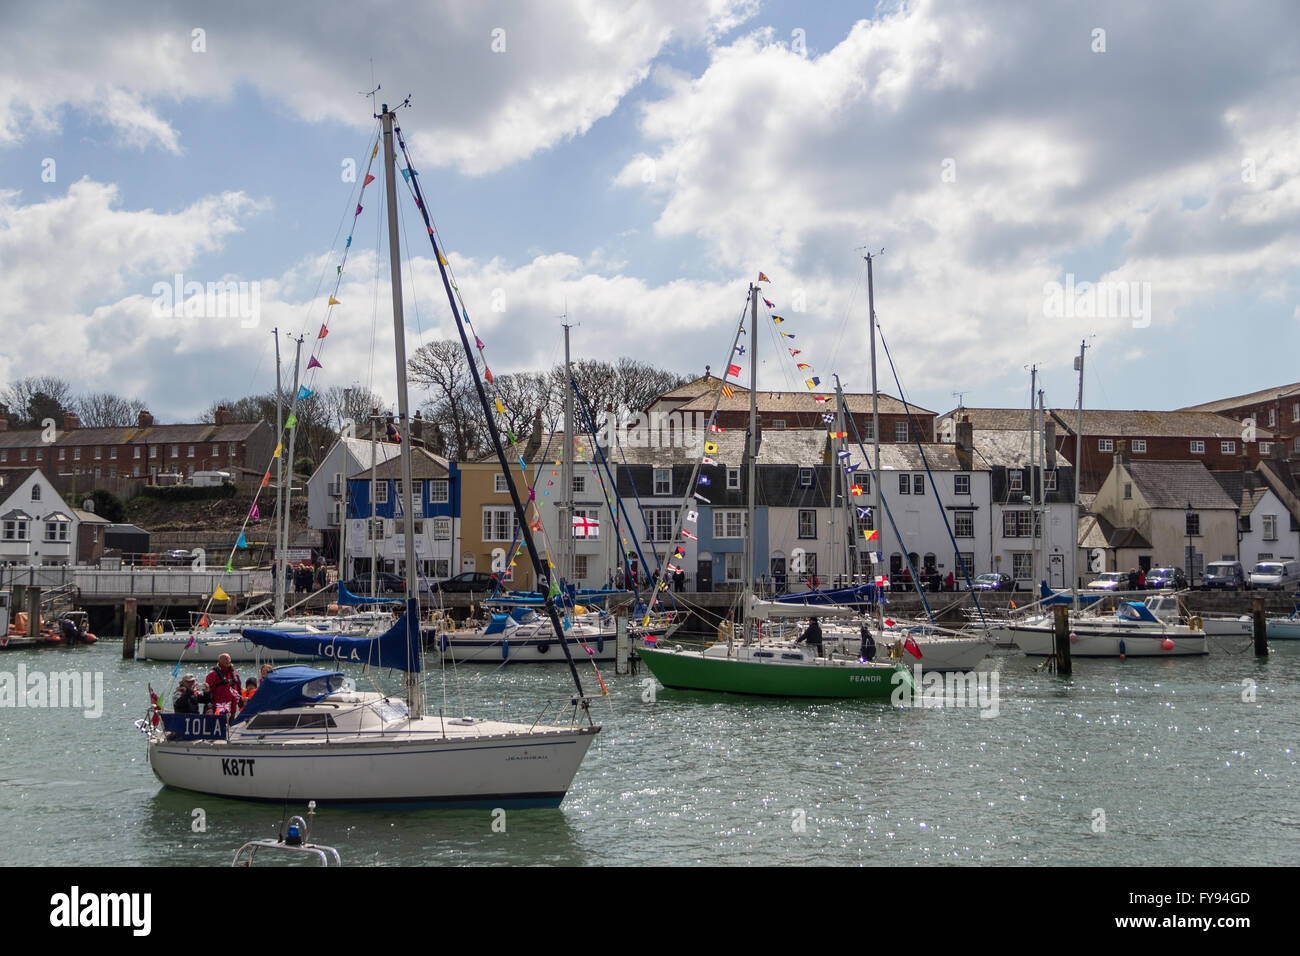 Weymouth, England. 23 April 2016. Queen's 90th Birthday Floating Tribute. Several boats in harbour, decked with flags. Credit:  Frances Underwood/Alamy Live News Stock Photo